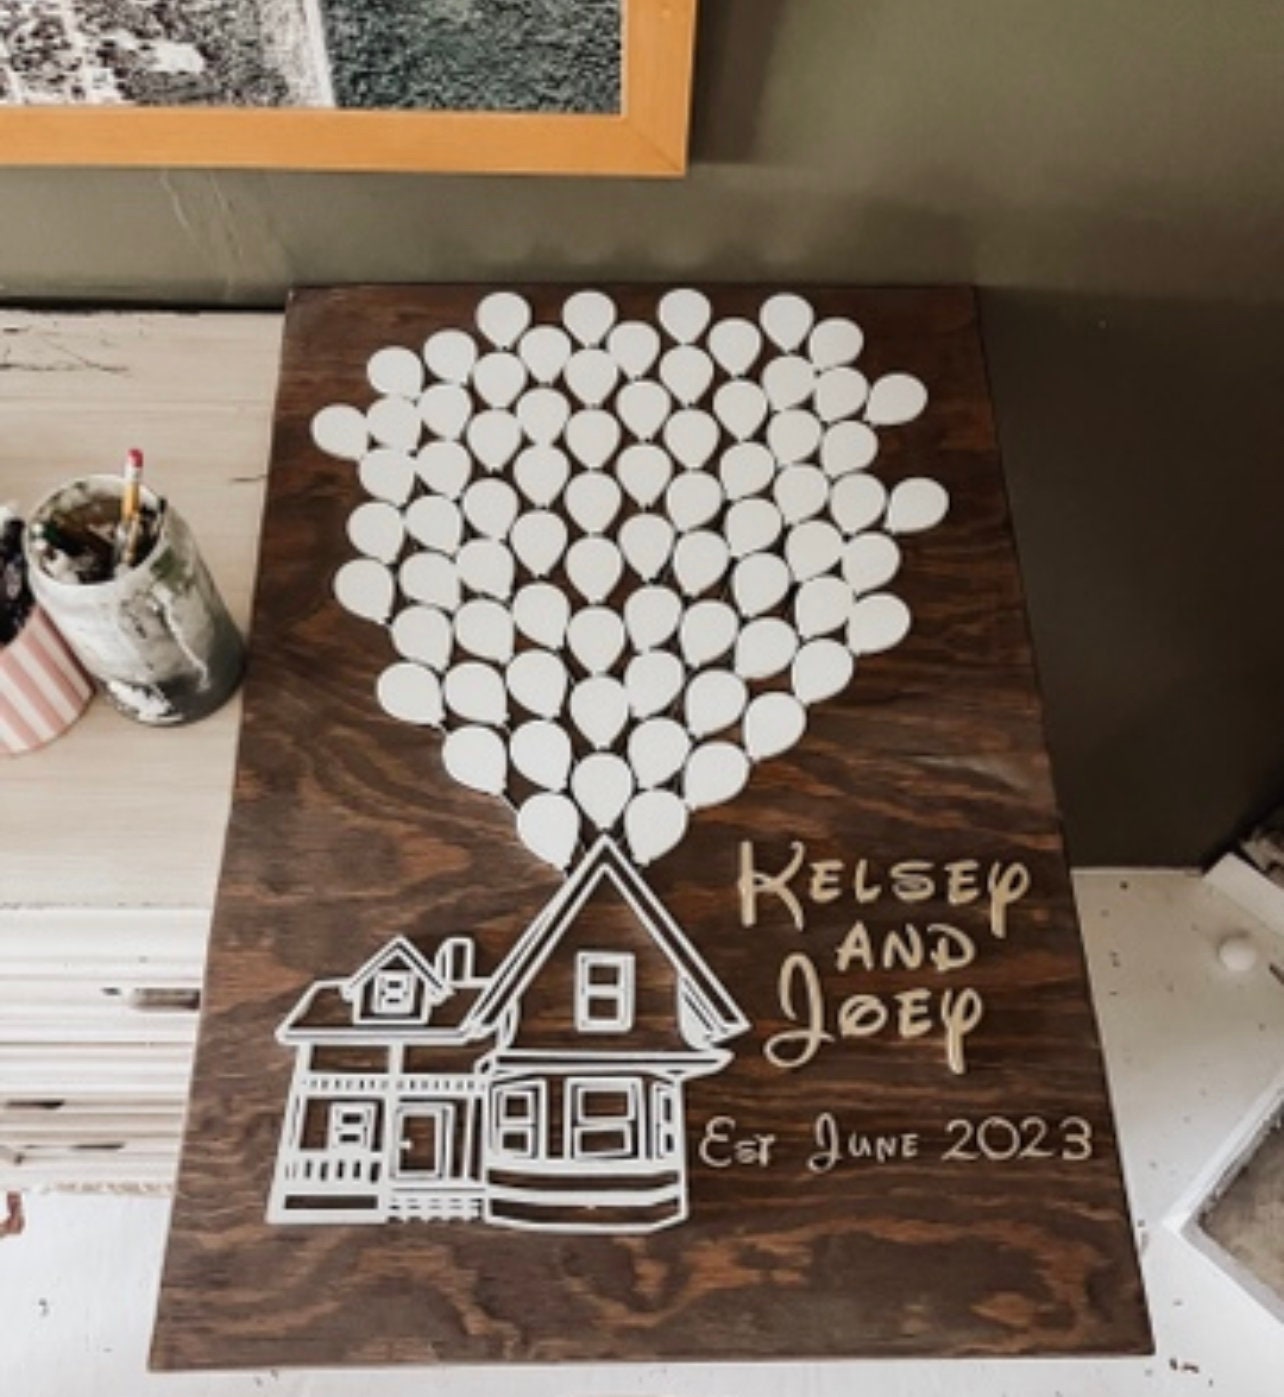 If you loved the movie Up, you'll love this guest book • Offbeat Wed (was  Offbeat Bride)